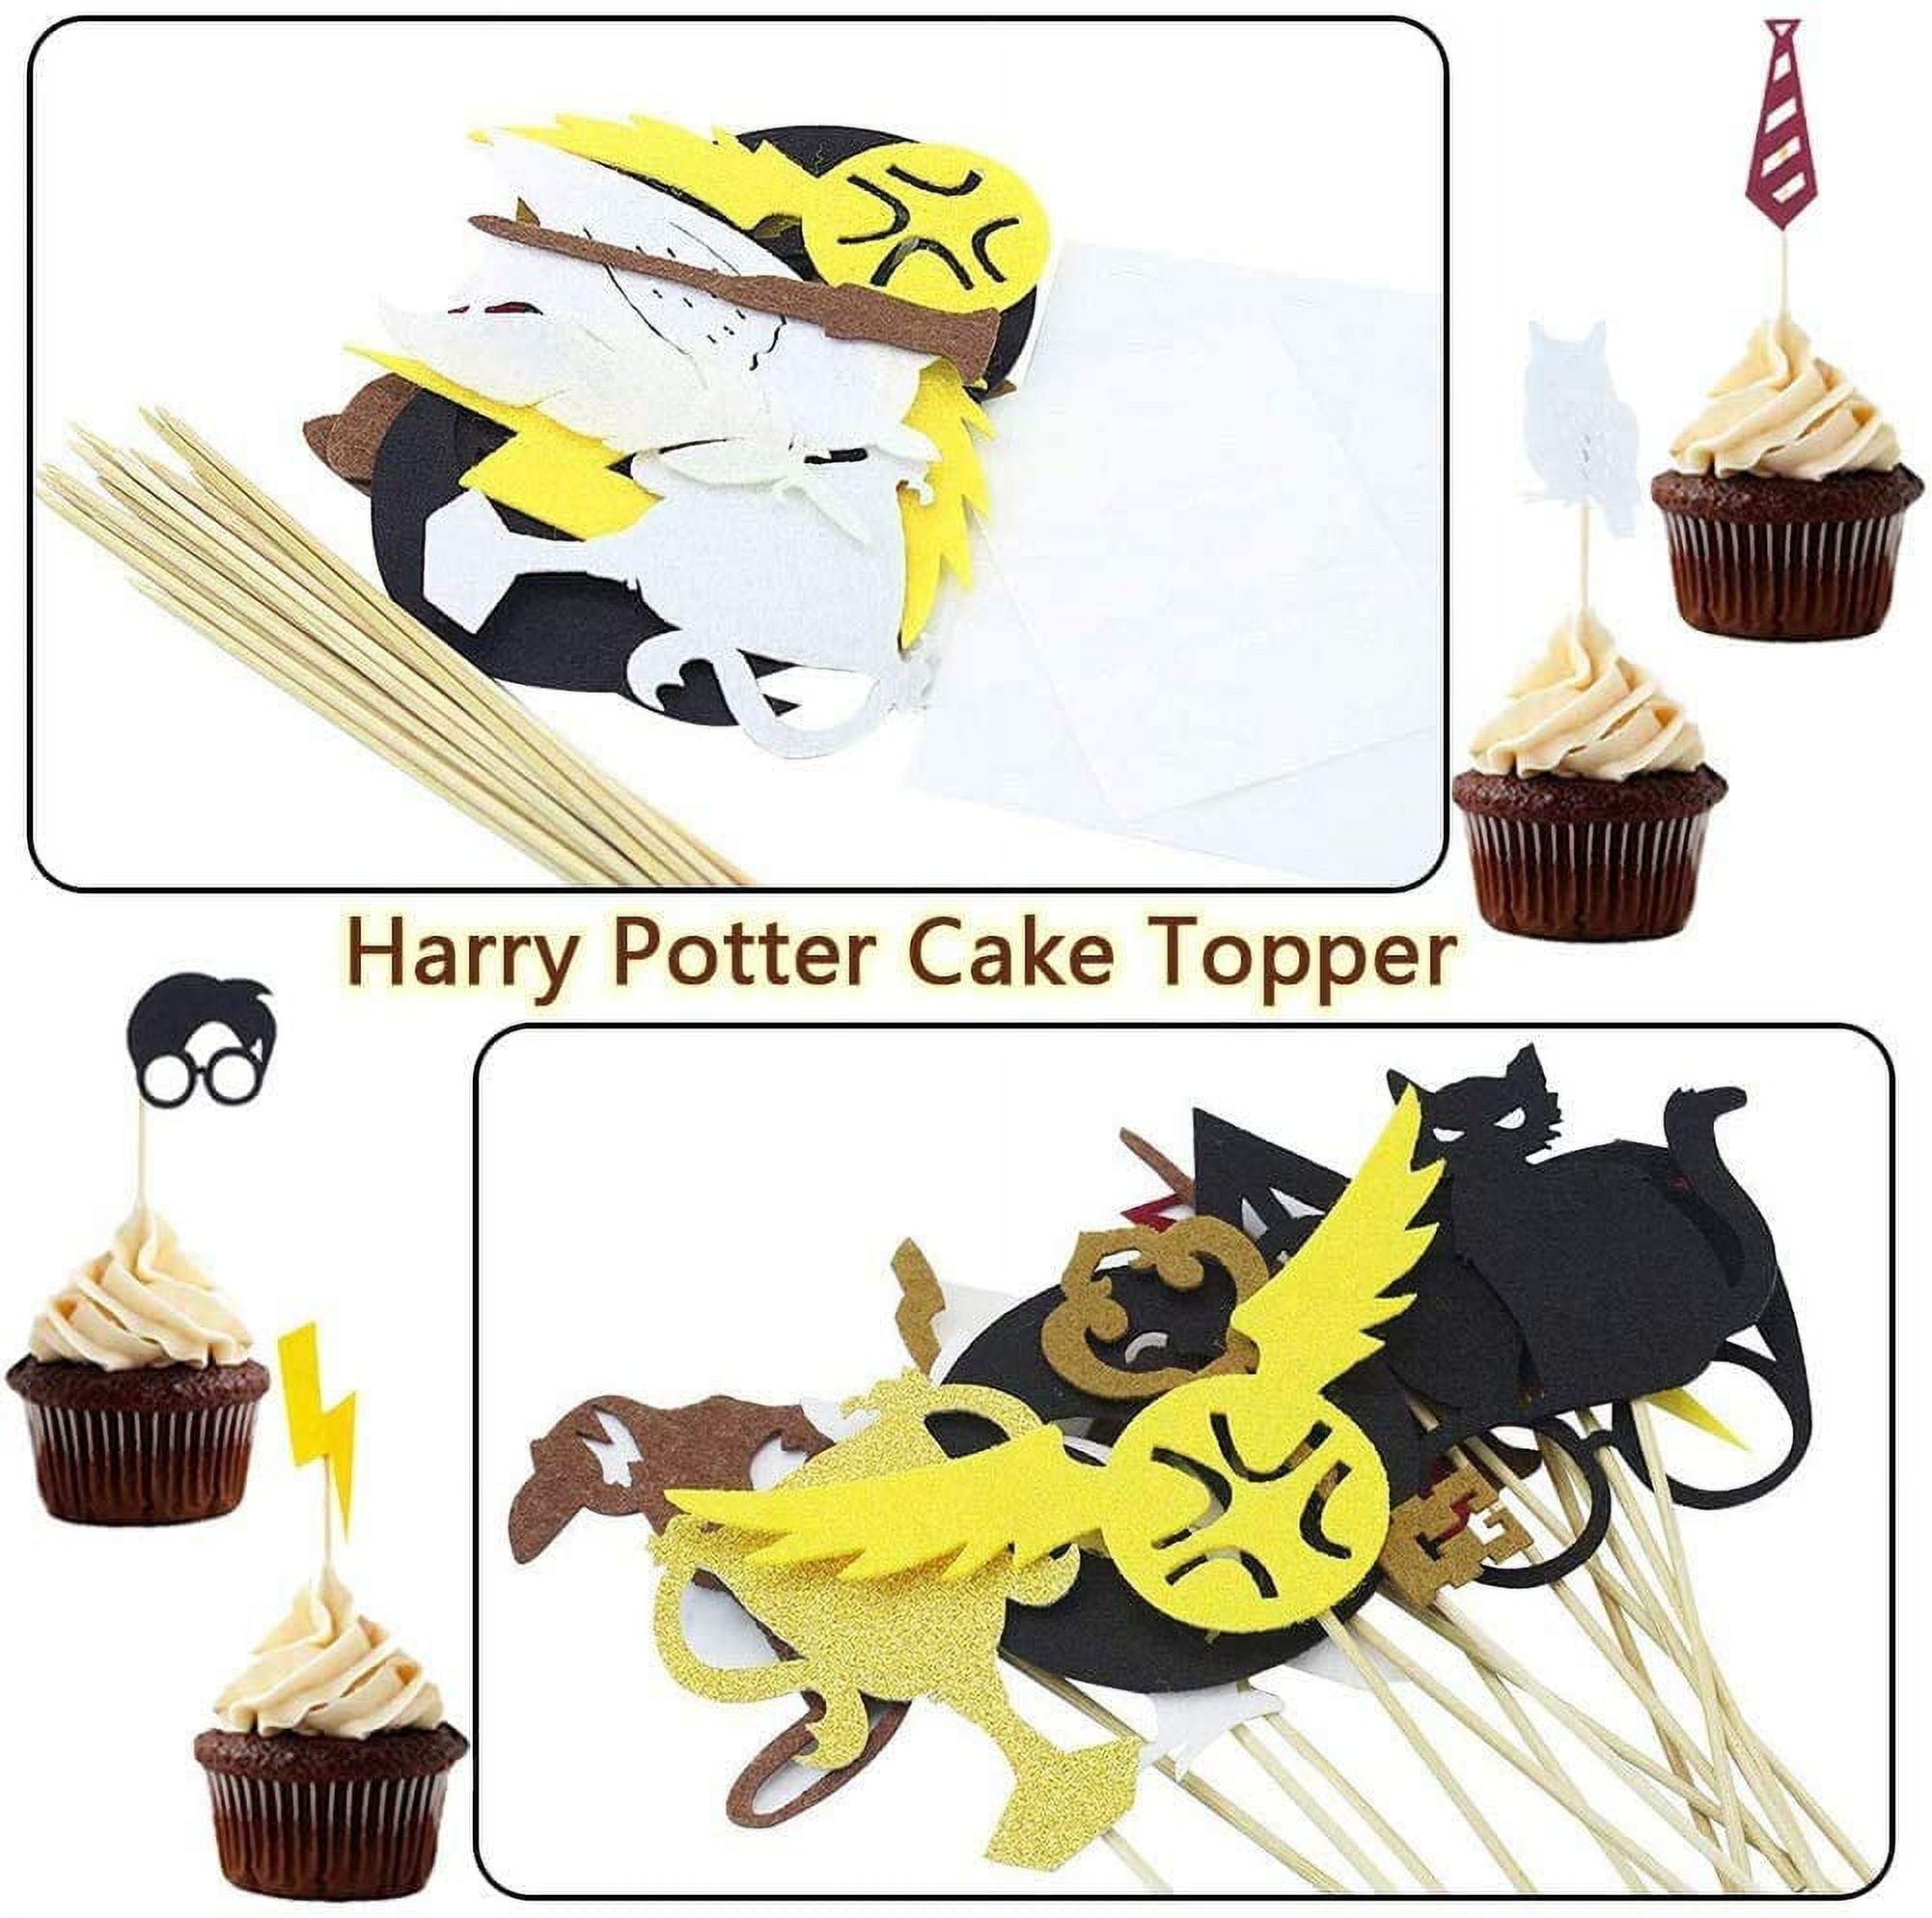 Harry Potter Birthday Party Decorations, Happy Birthday Banner, Balloons,  Cake & Cupcake Toppers, Magic Wizard Party Supplies